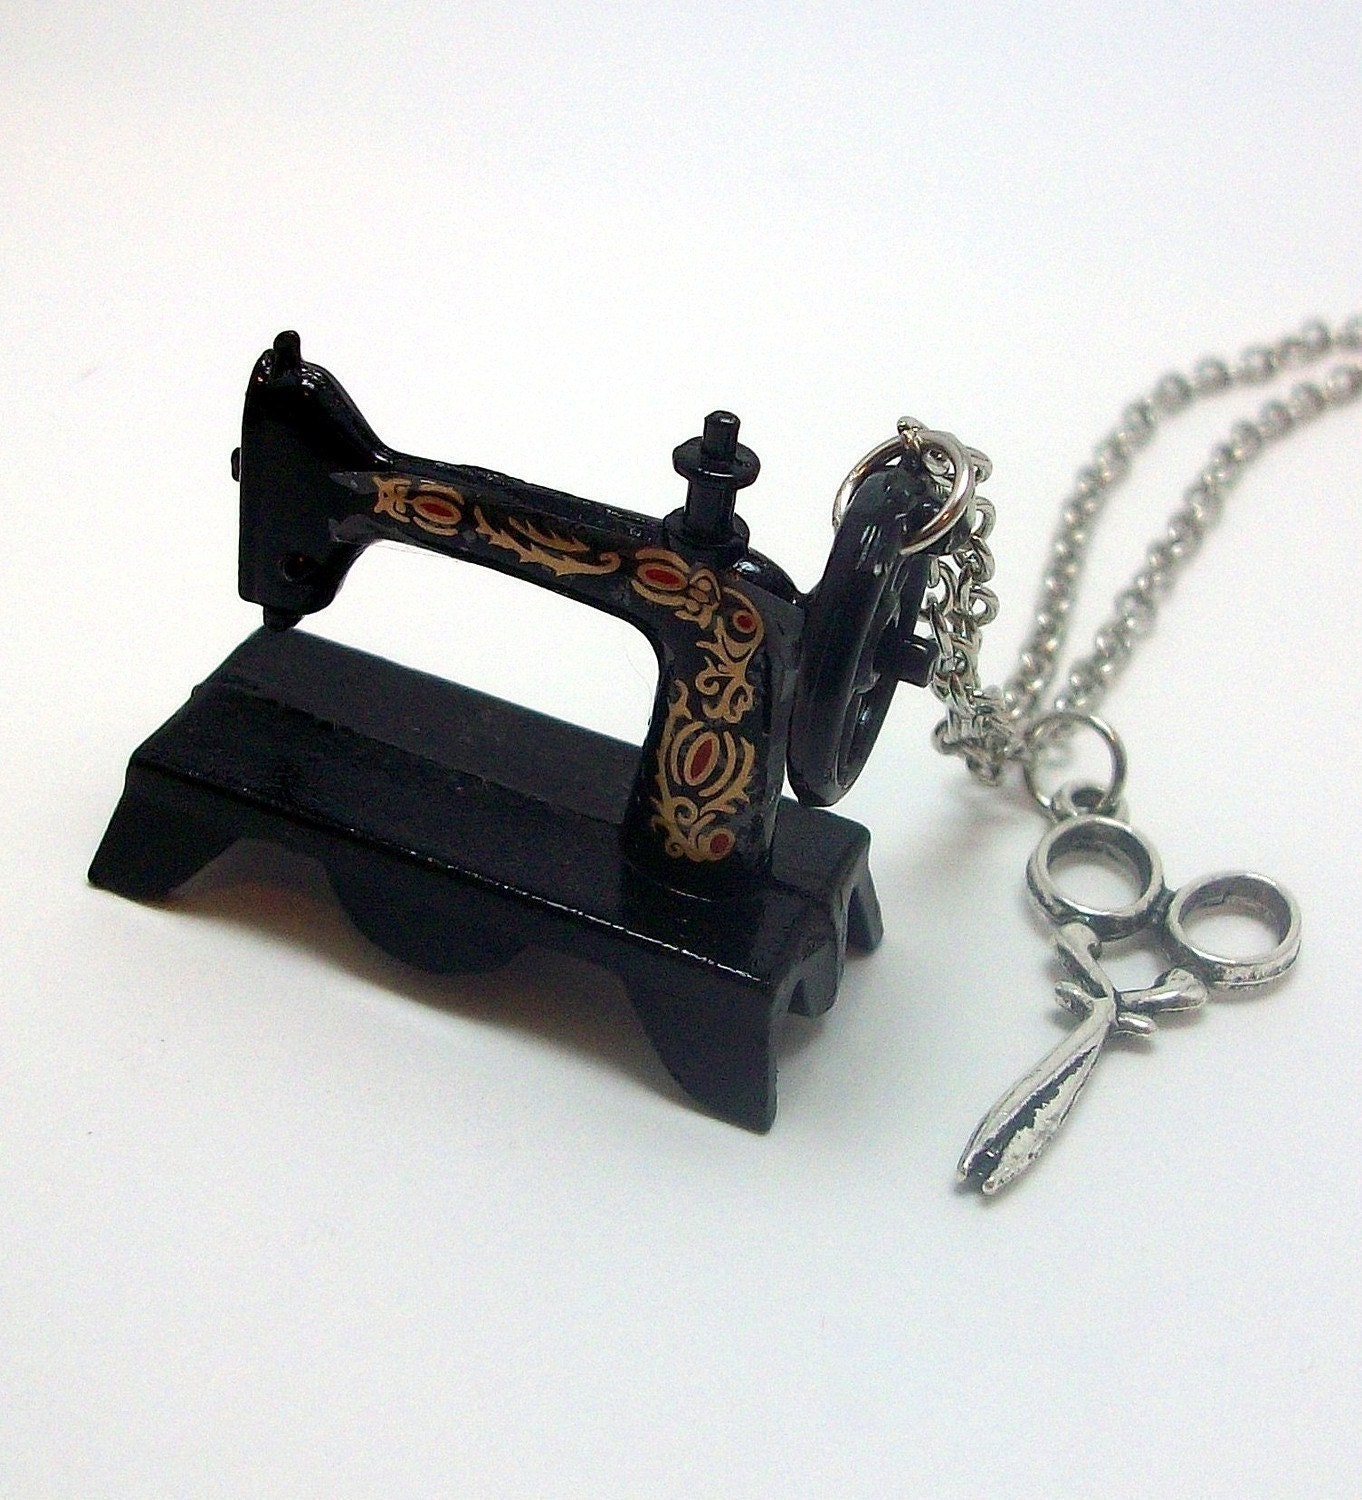 Sewing Machine and Scissors Necklace - FREE Shipping